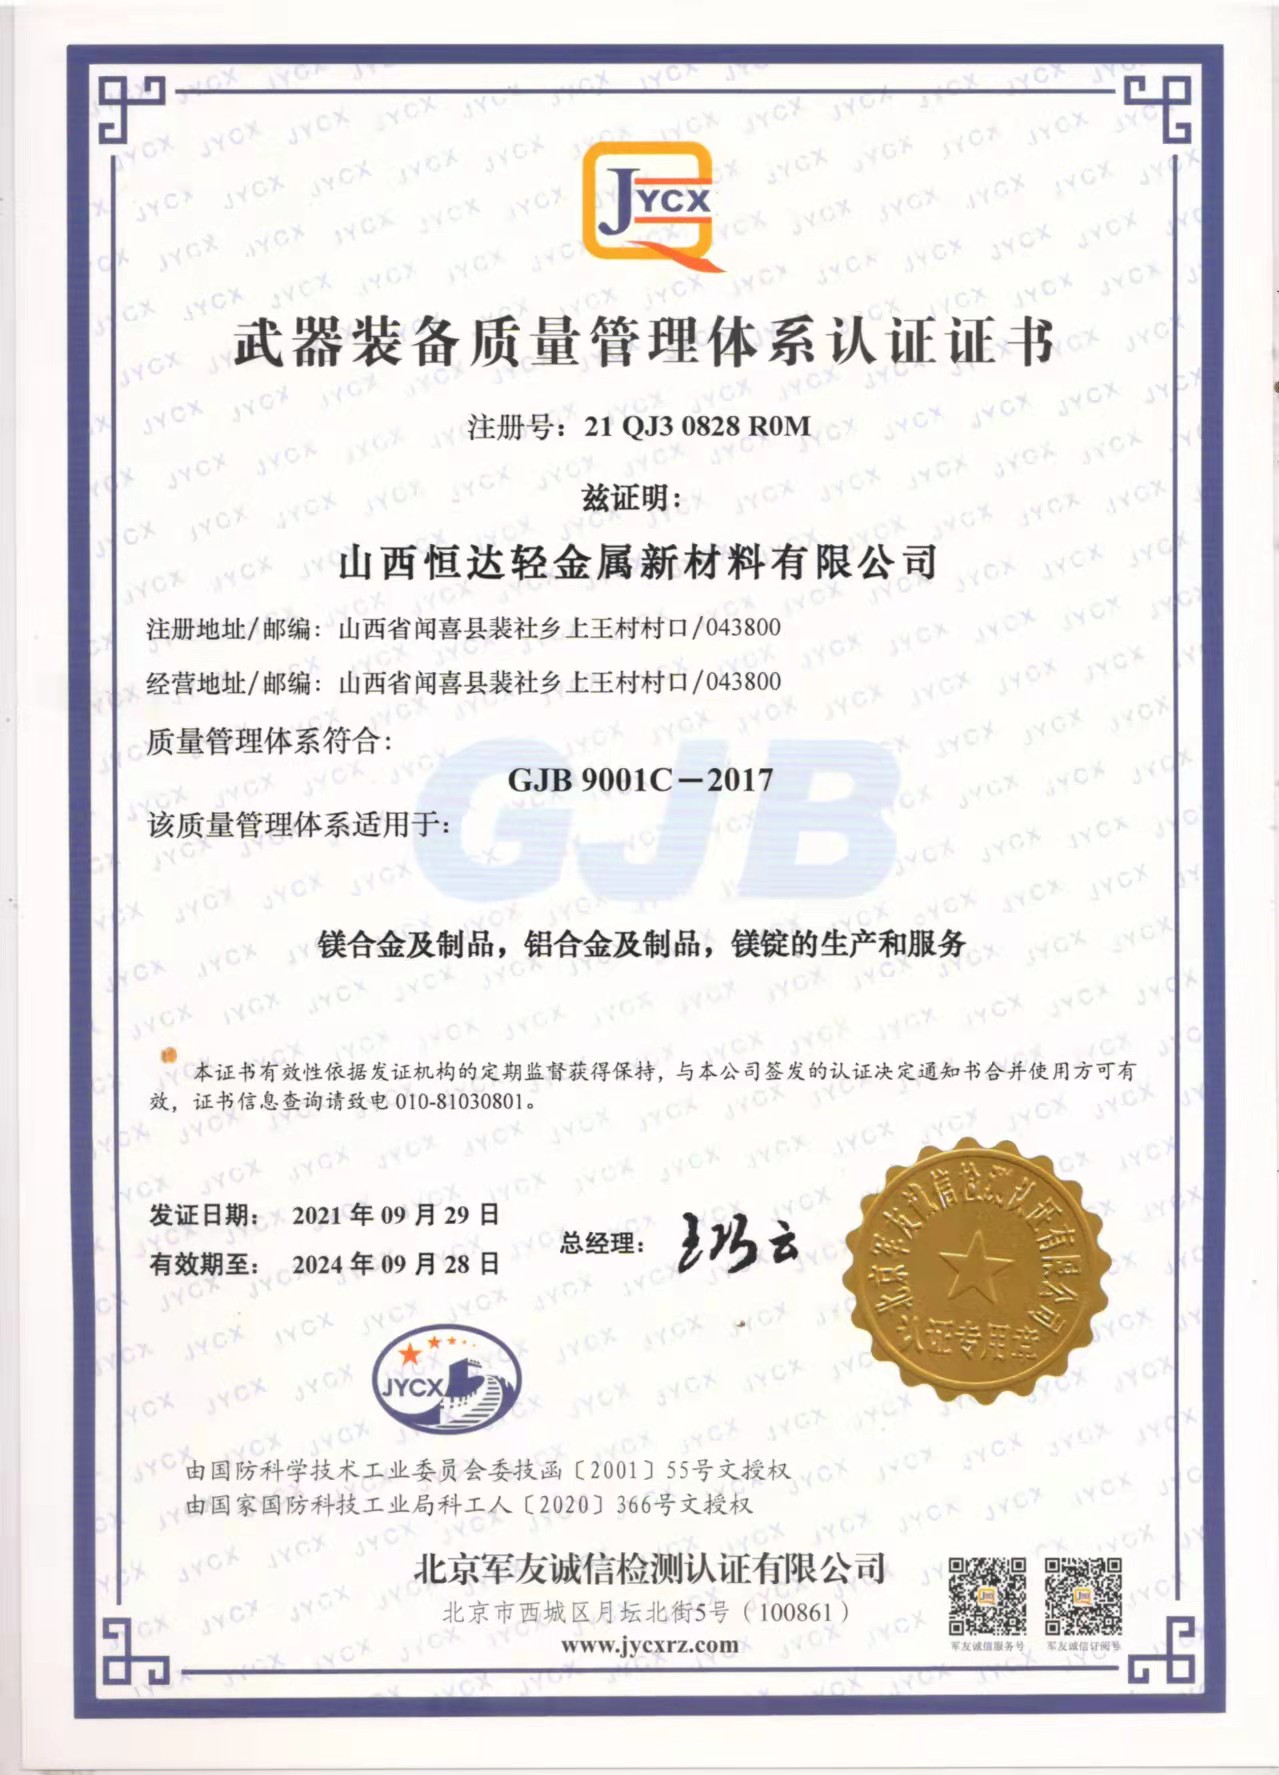 GJB 9001C-2017 Weapon Equipment Quality Management System Certificate